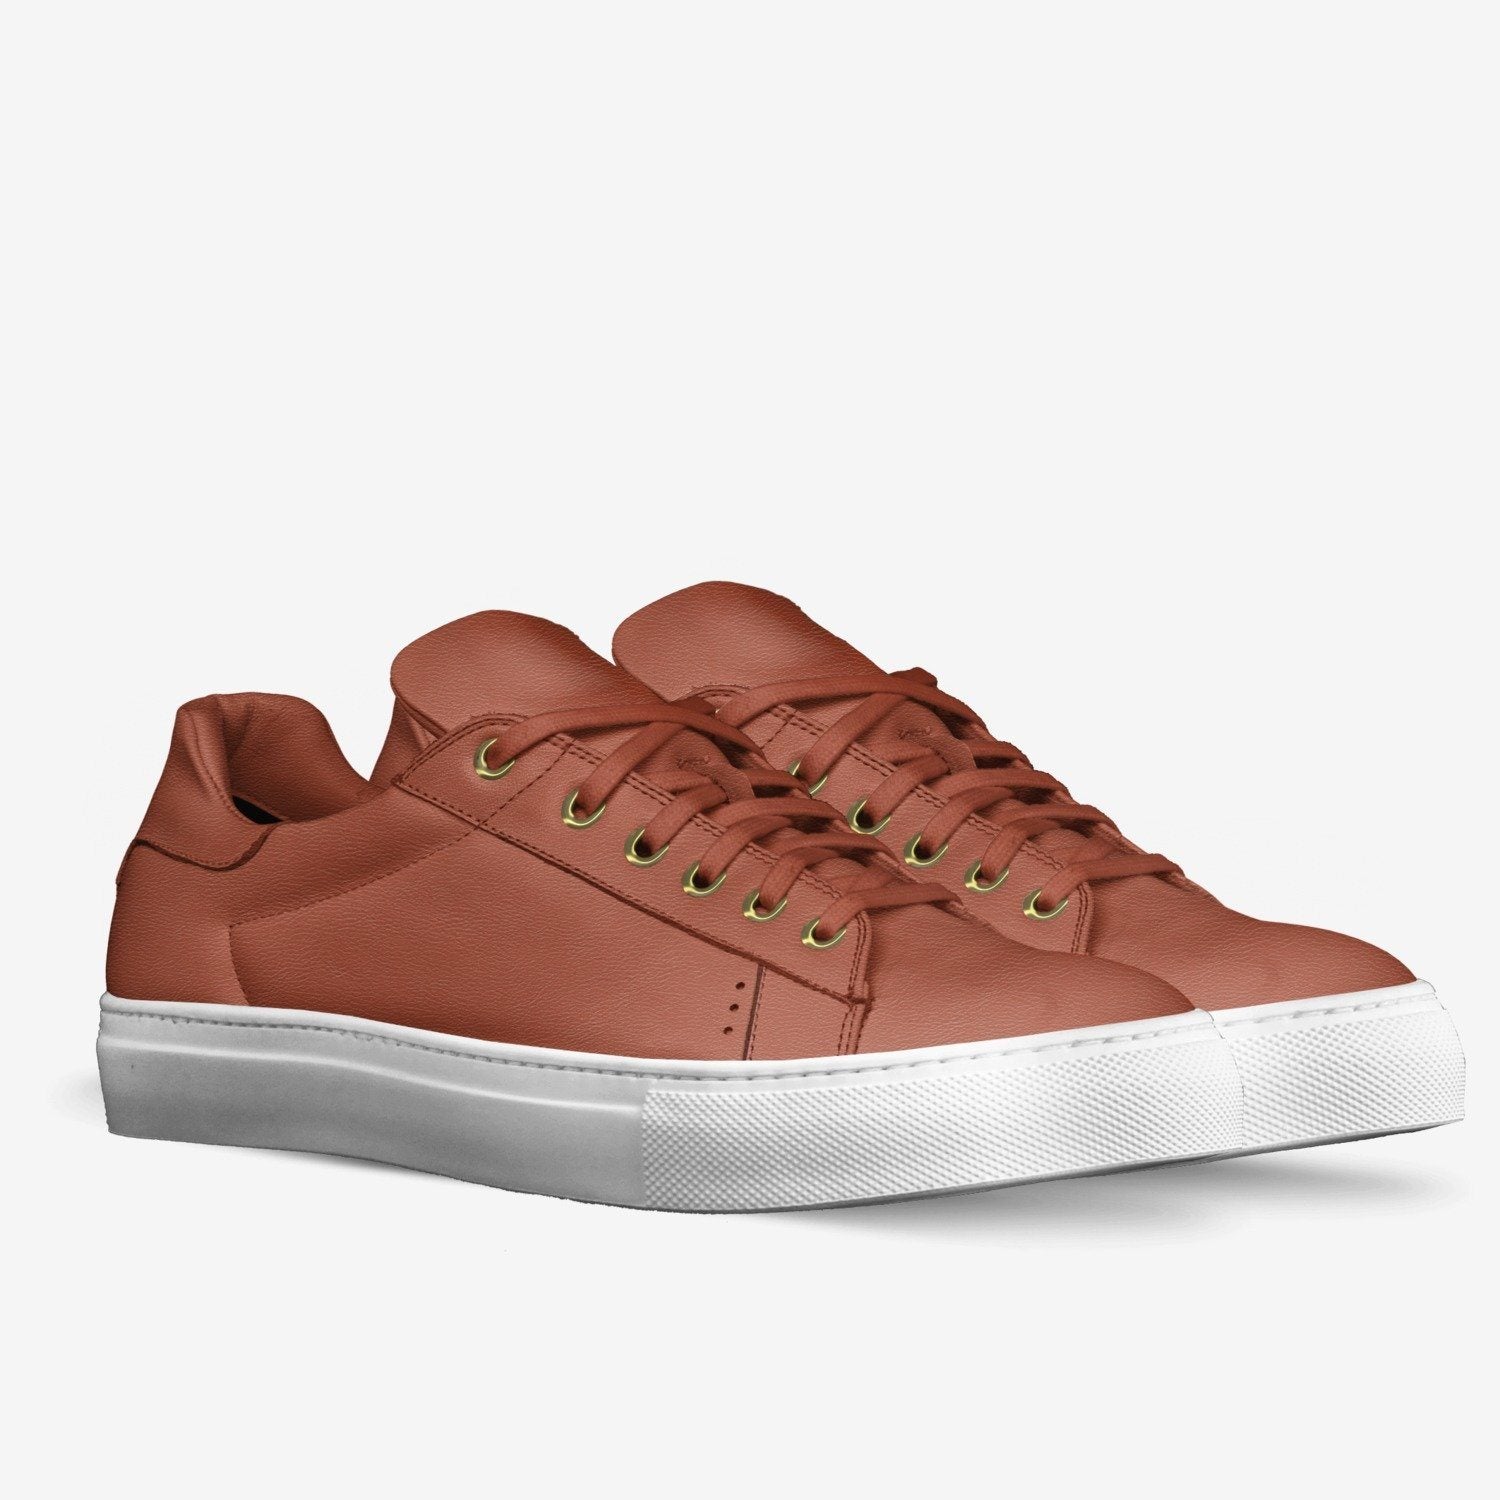 LORENZO LEATHER SNEAKERS IN VERMILLION | Poor Little Rich Boy Clothing